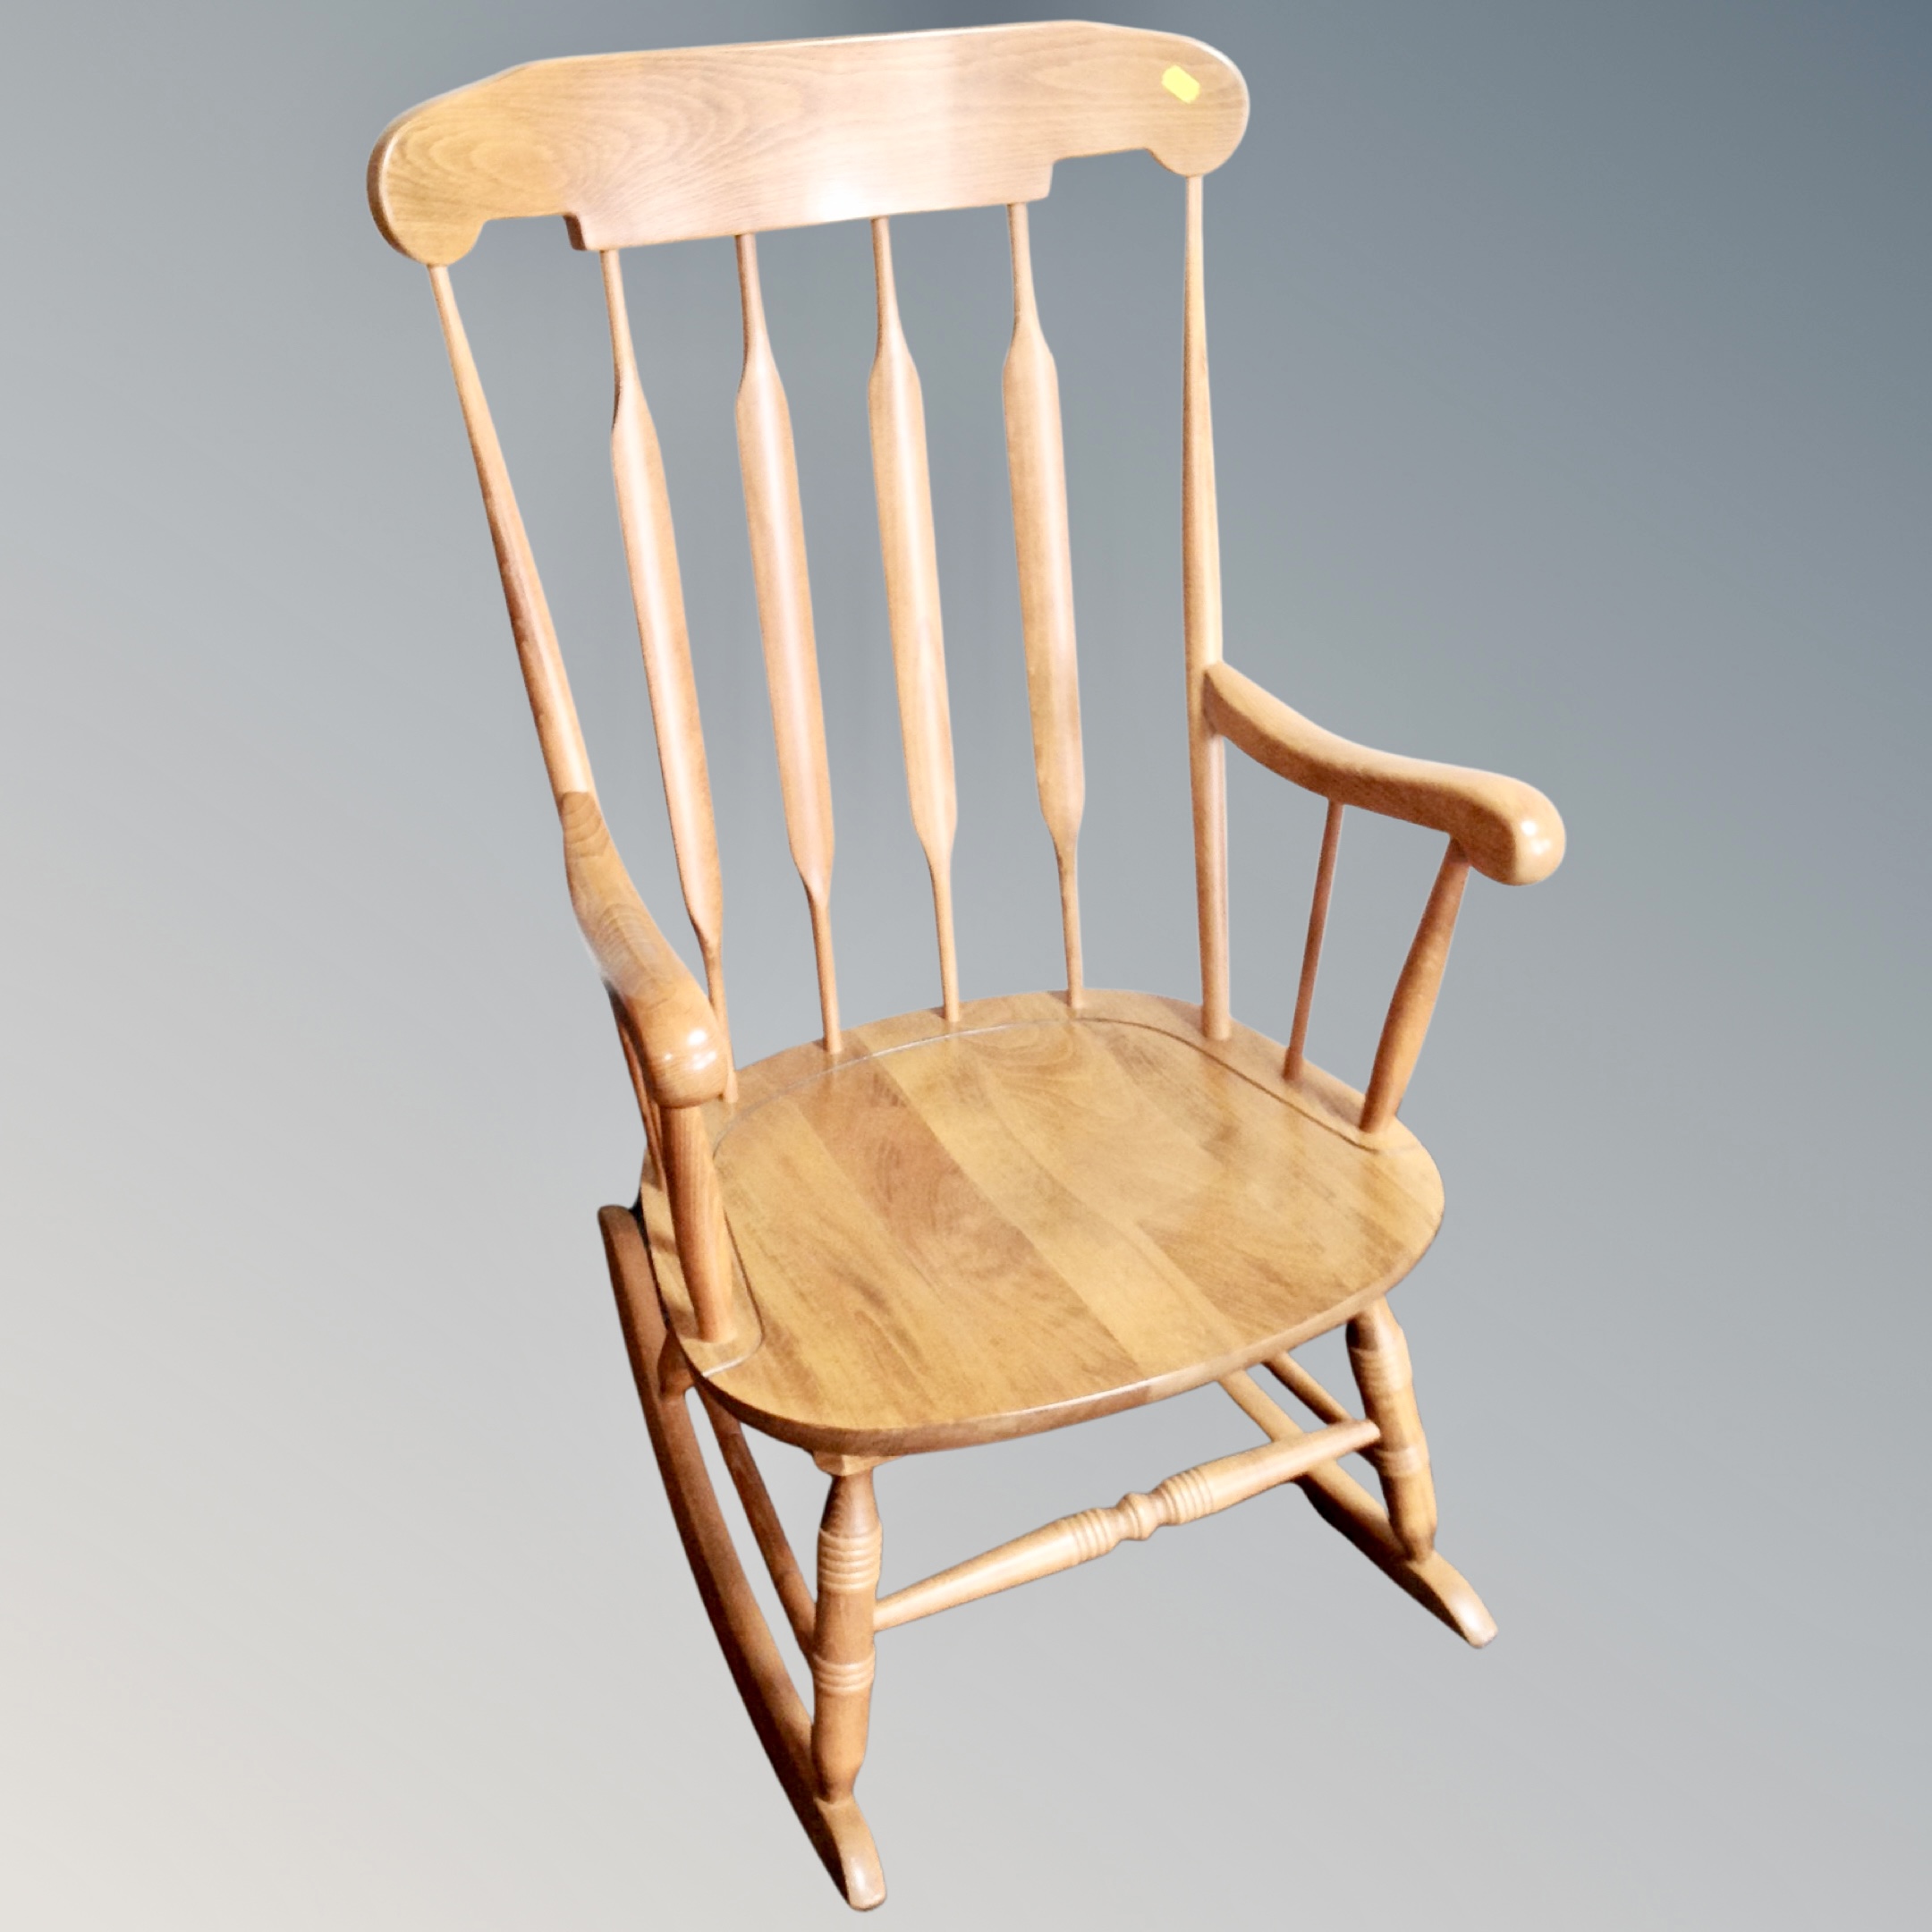 A beech spindle backed rocking chair